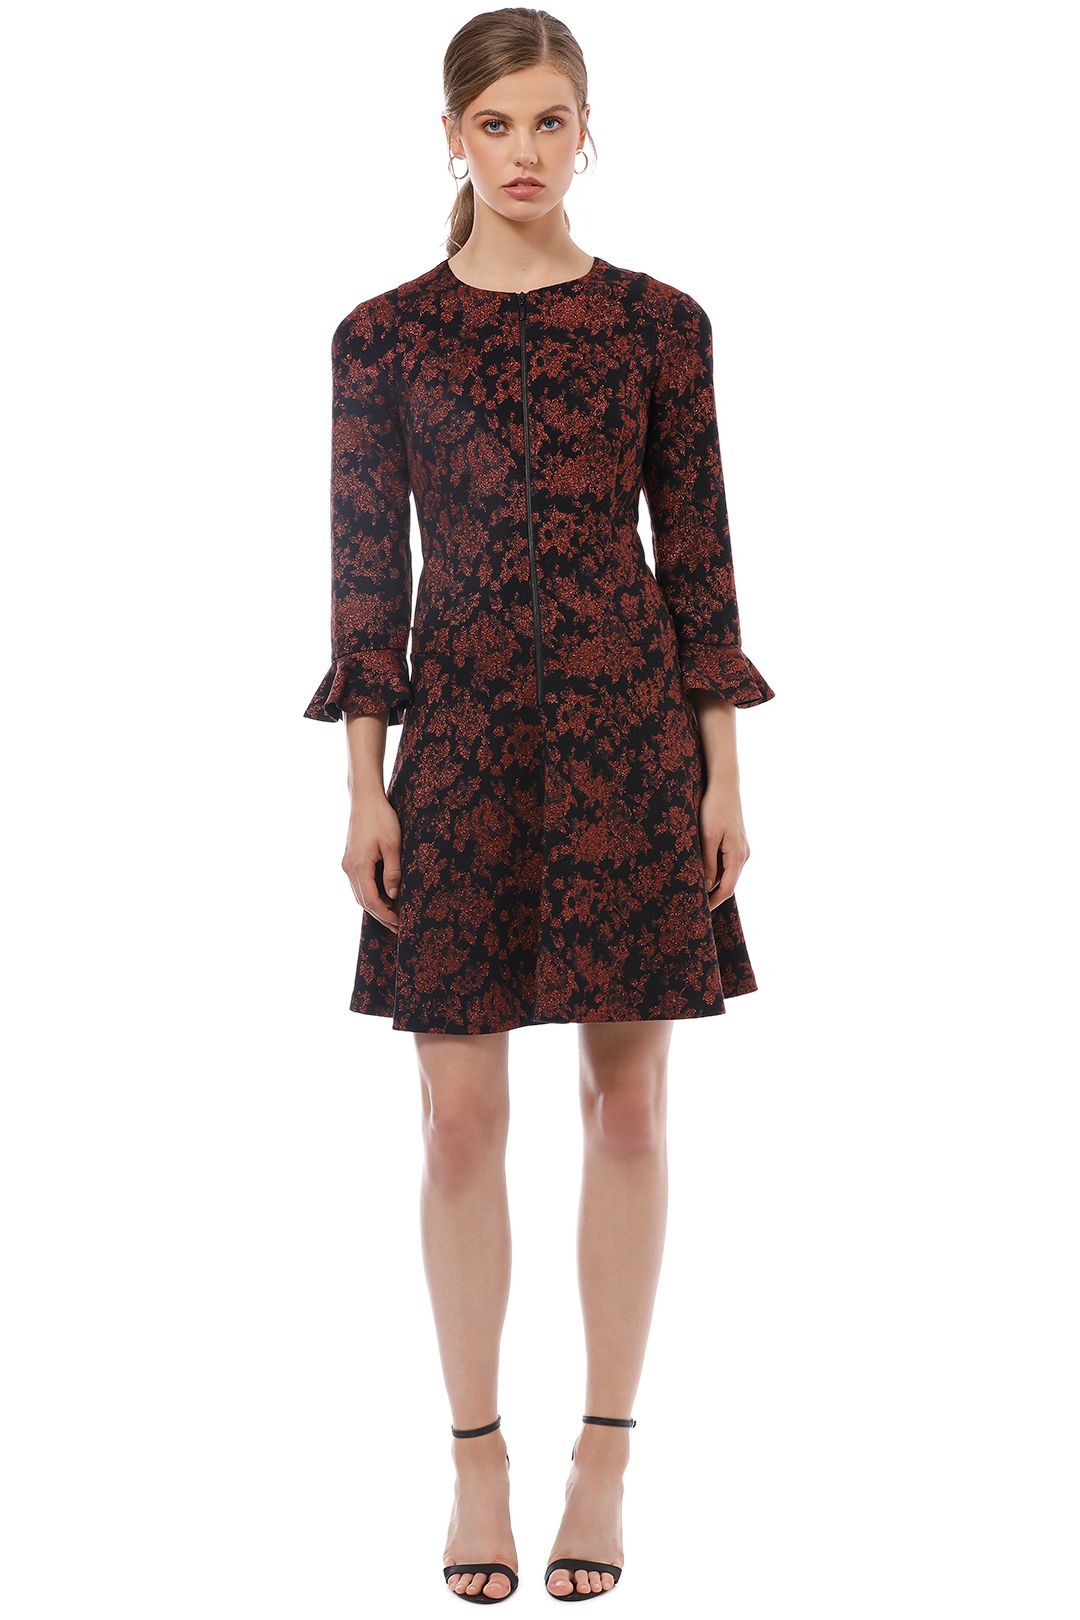 Cue - Metallic Floral Jacquard Dress - Red Print - Front